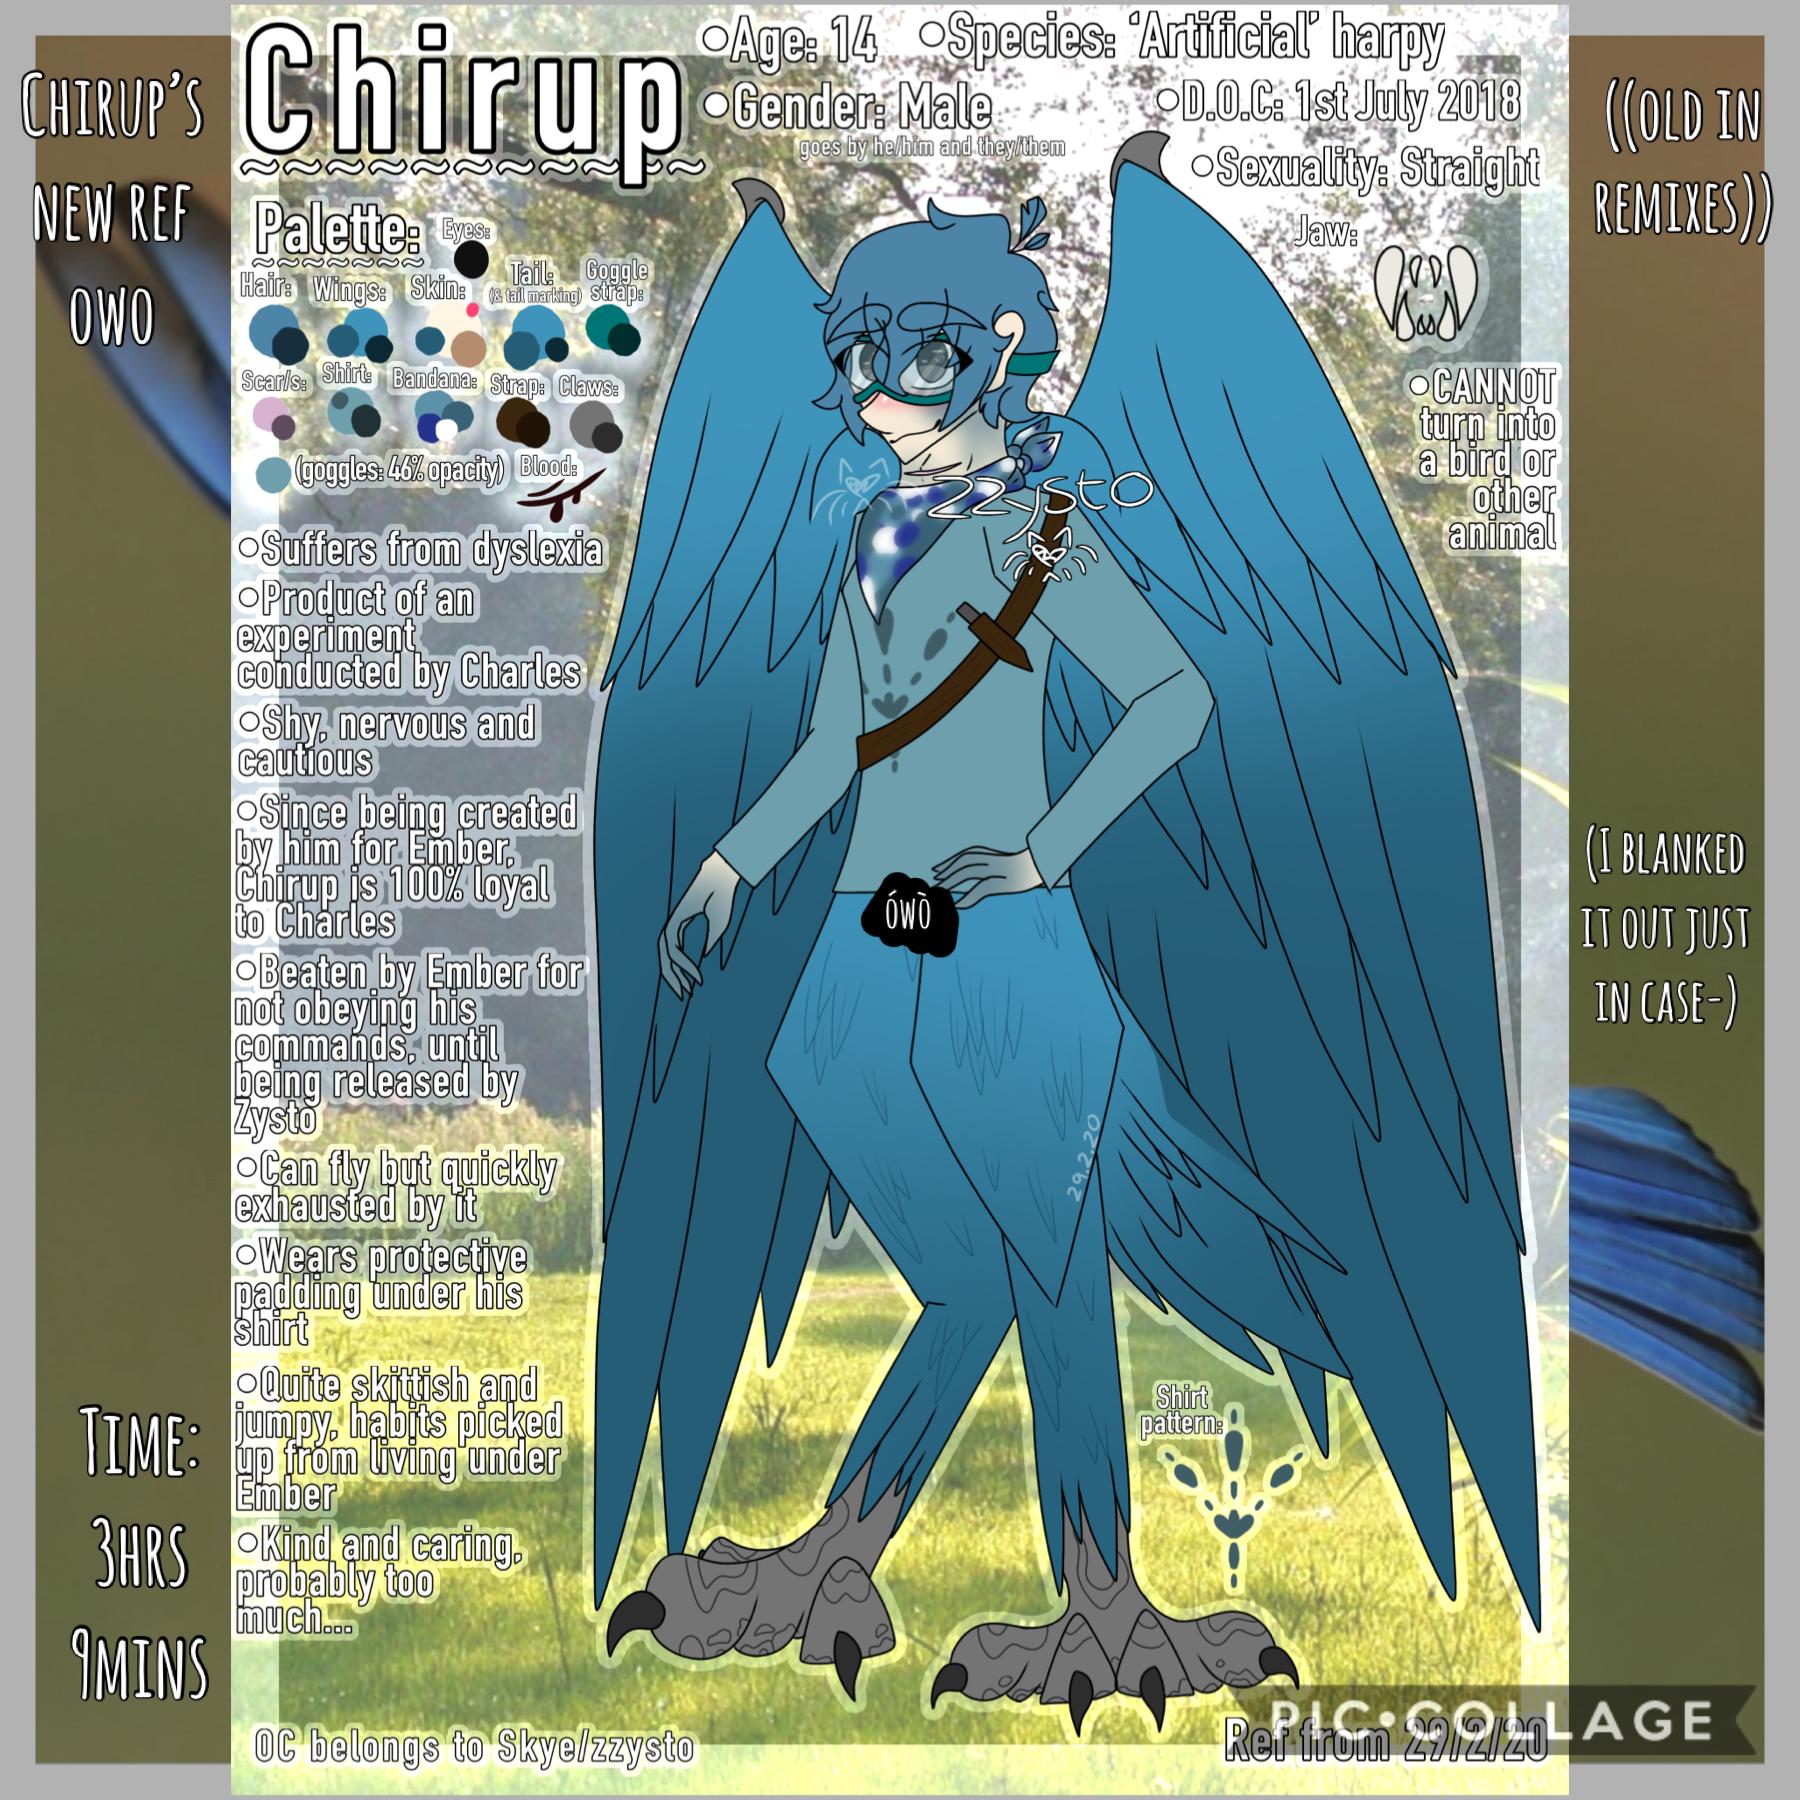 🦅Tap🦅
((old in remixes))
I haven’t been feeling close to some ocs lately, and Chirup is one of my main. I decided to give him a new ref as well as redesign him which I’ve been meaning to for a while. I hope y’all are ok with the changes-